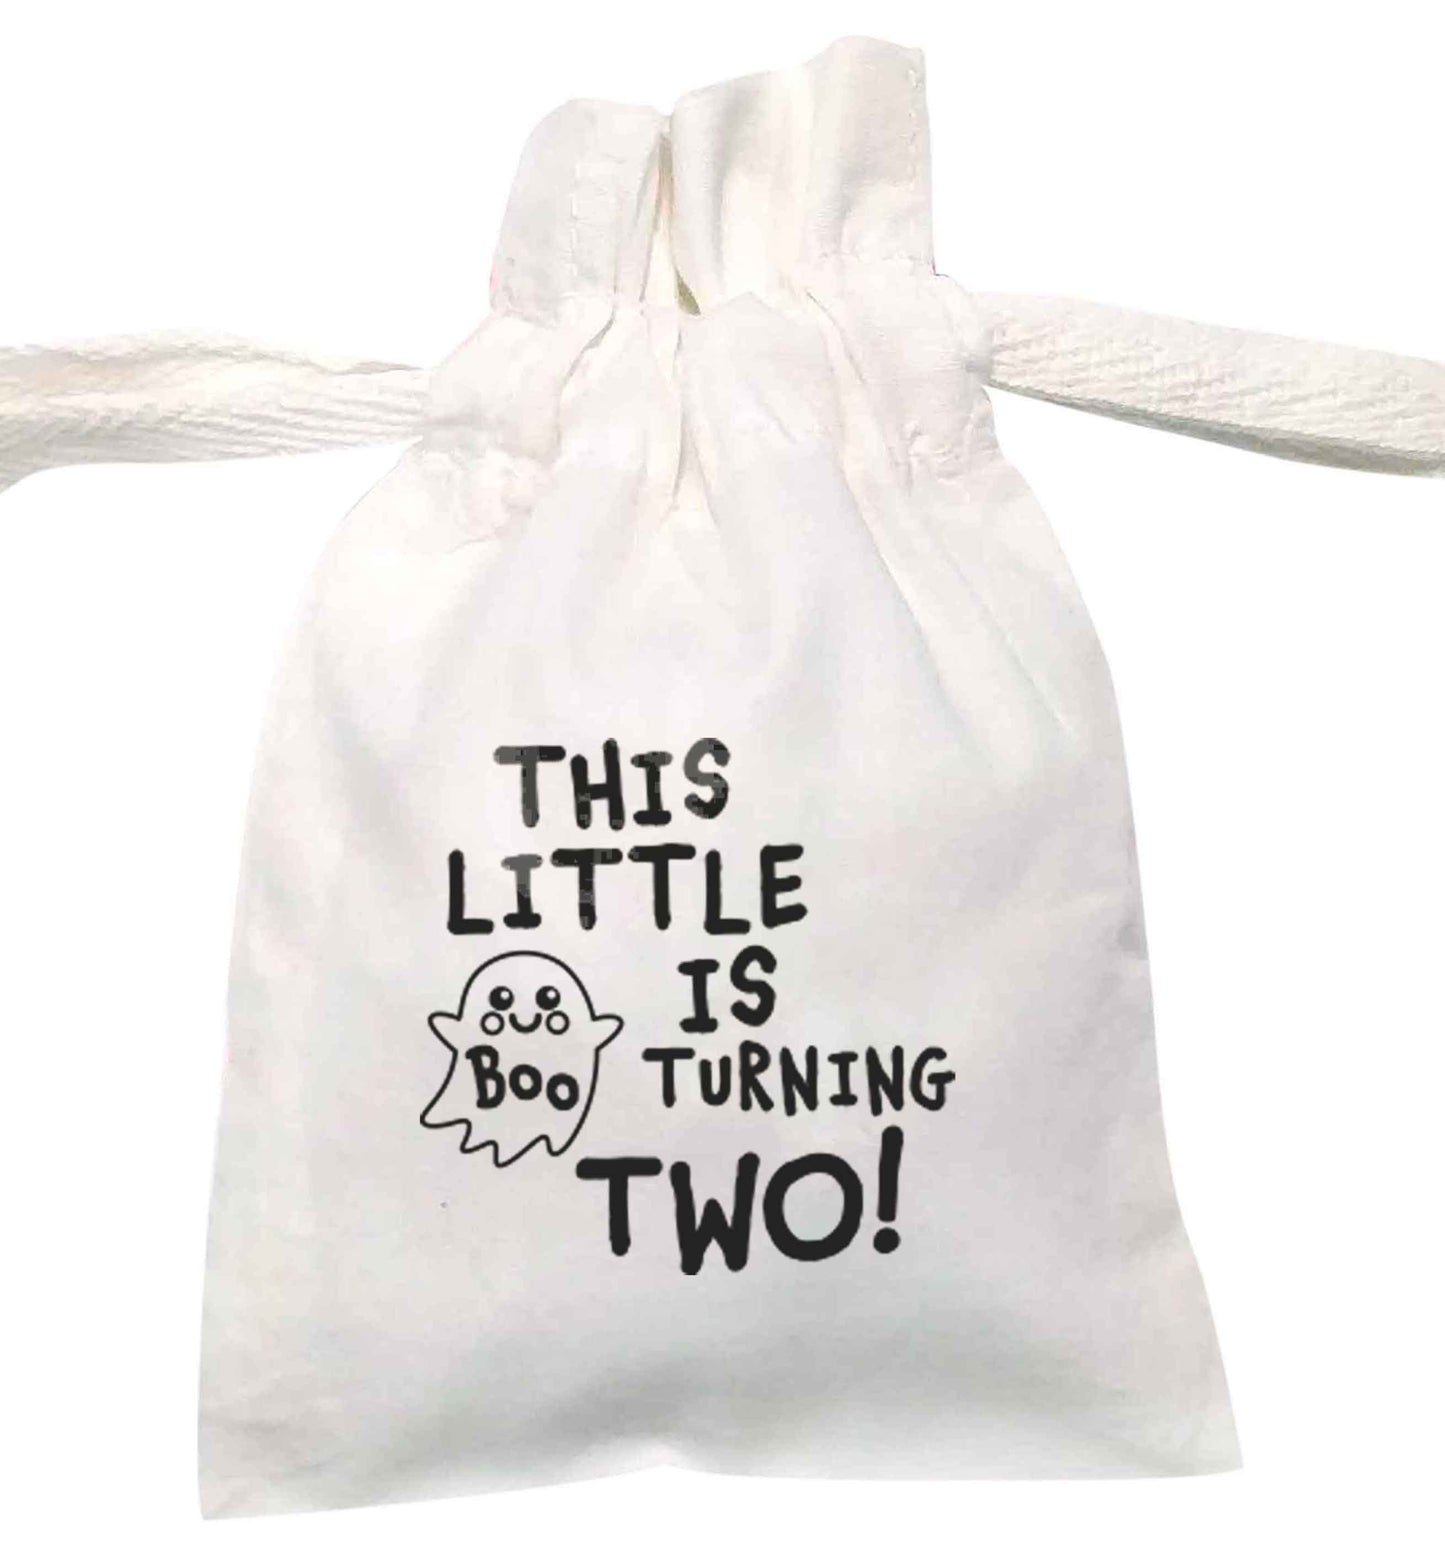 This little boo is turning two | XS - L | Pouch / Drawstring bag / Sack | Organic Cotton | Bulk discounts available!